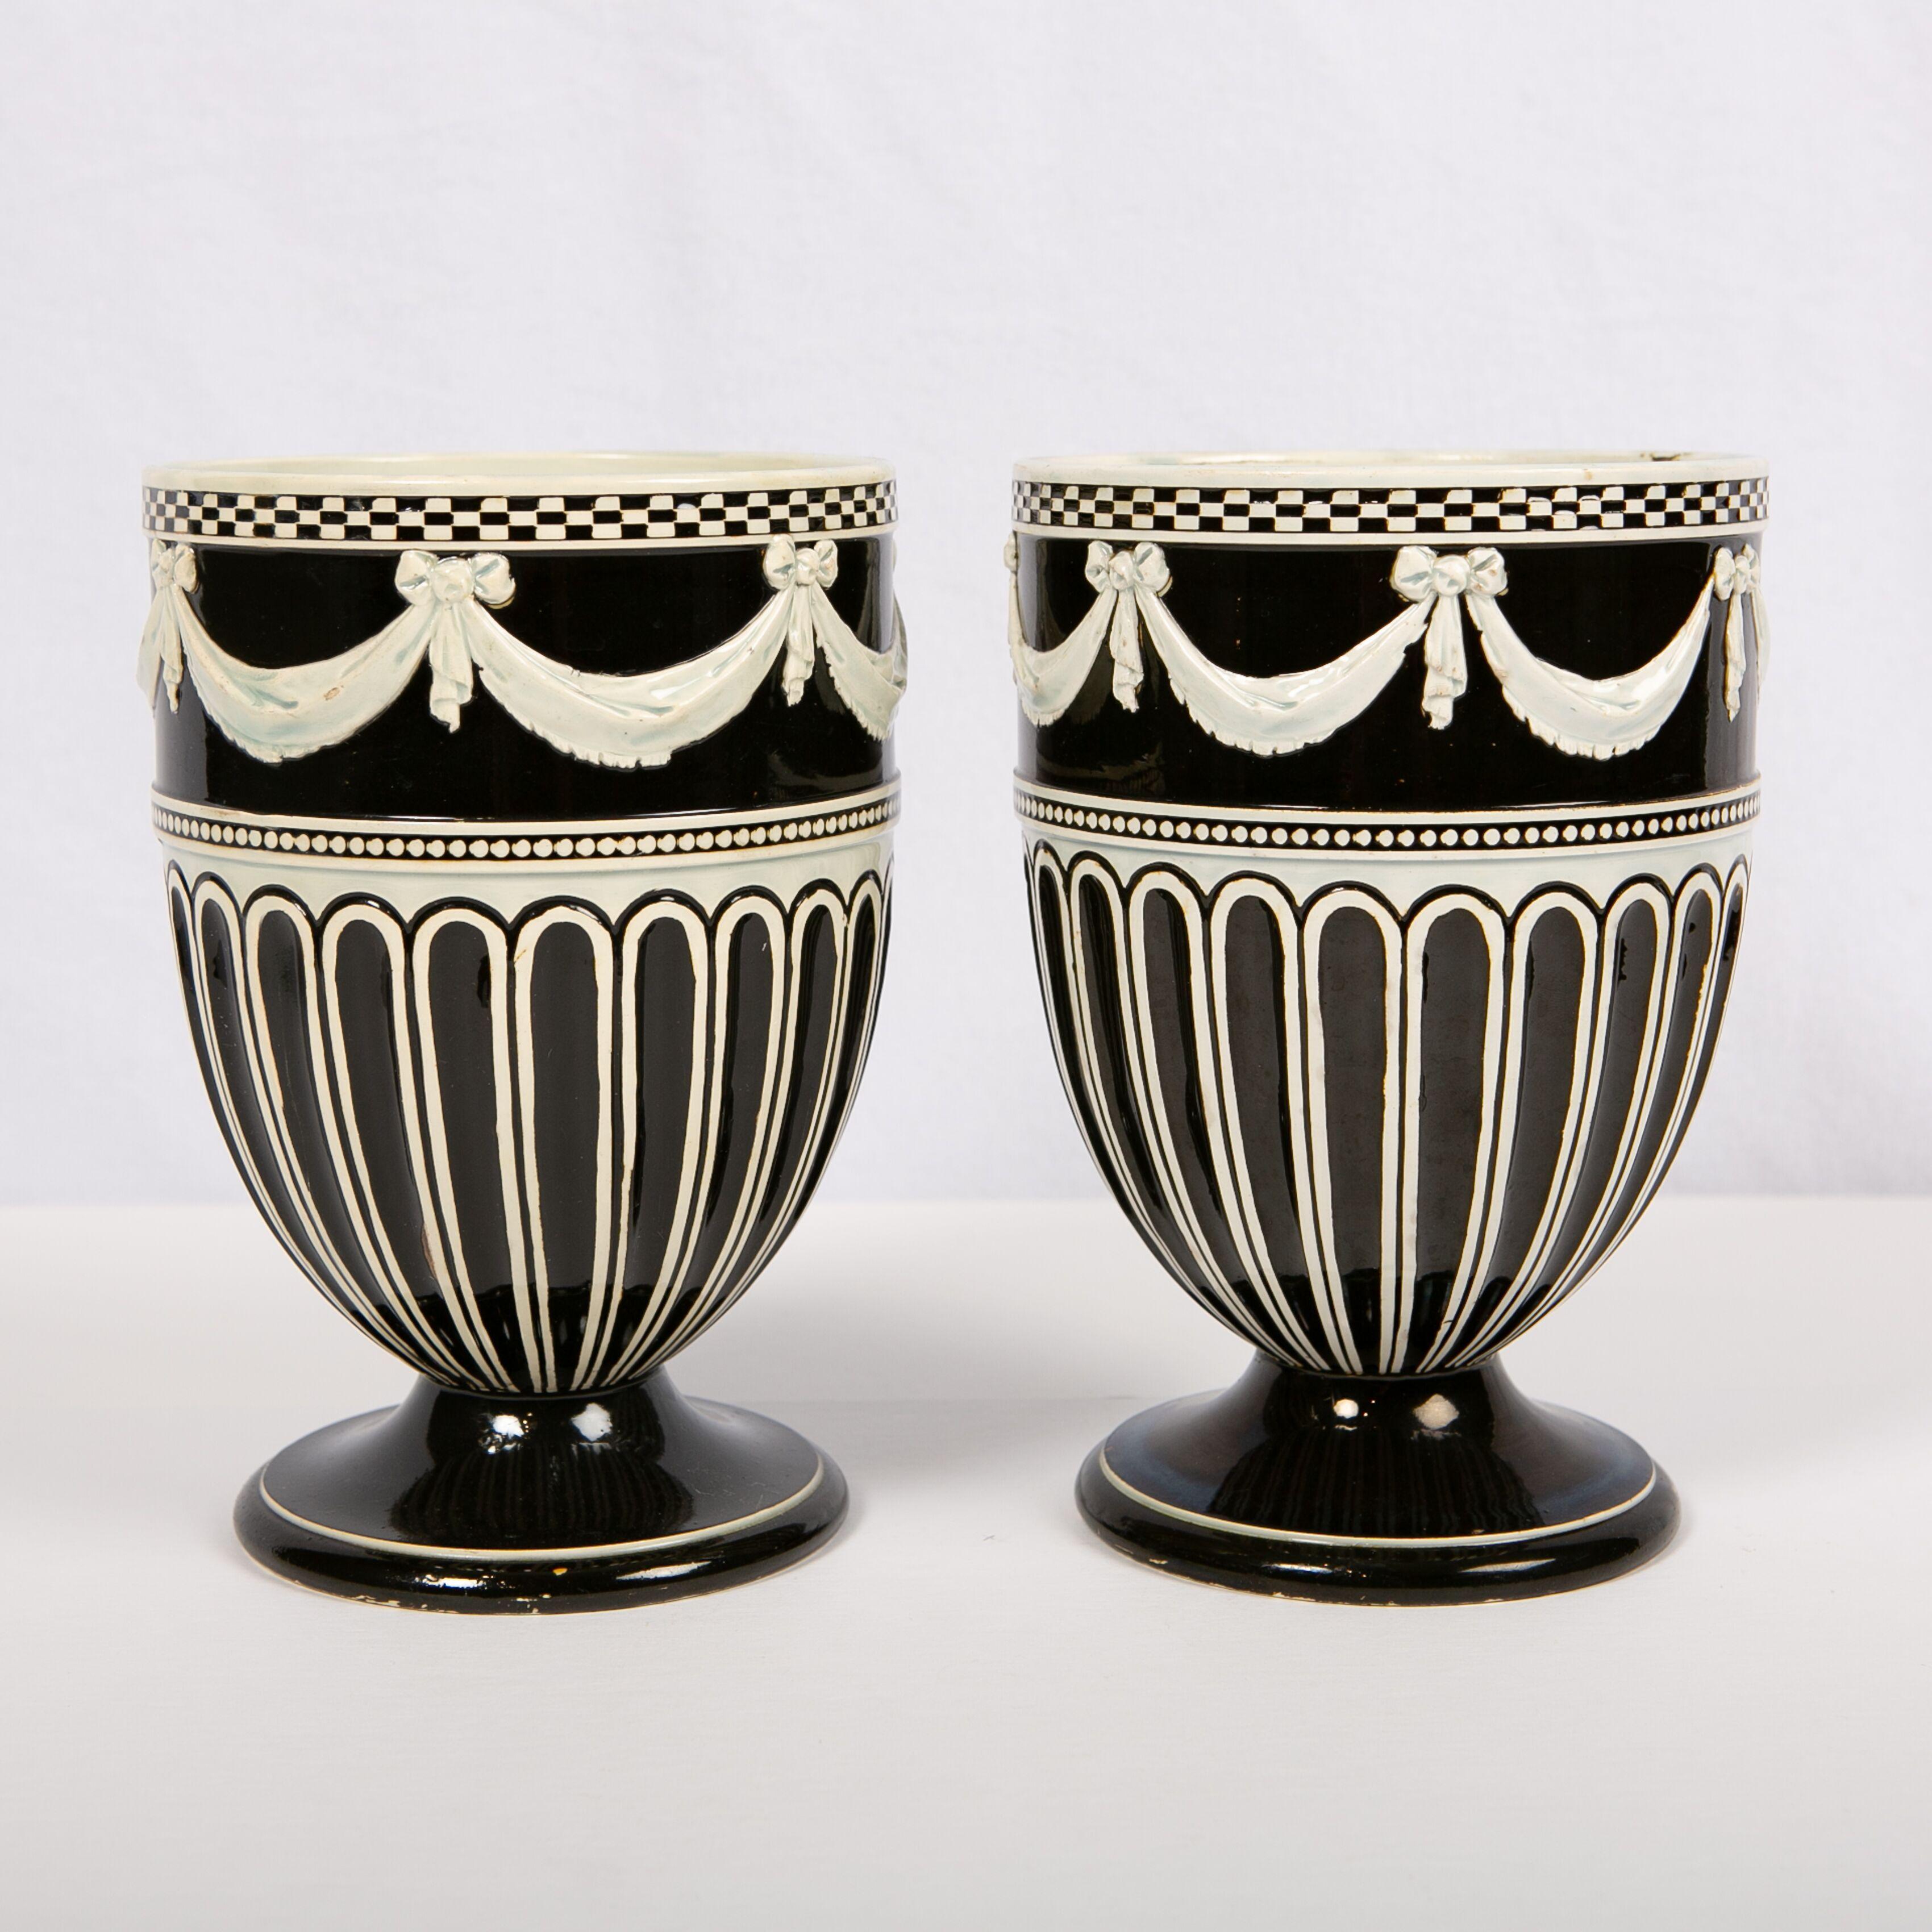 This pair of late 18th century Wedgwood pearl-glazed creamware vases is a powerful and beautiful example of Wedgwood's skill and artistry. The vases feature three types of workmanship. Around the top edge, we see engine-turned, checkerboard